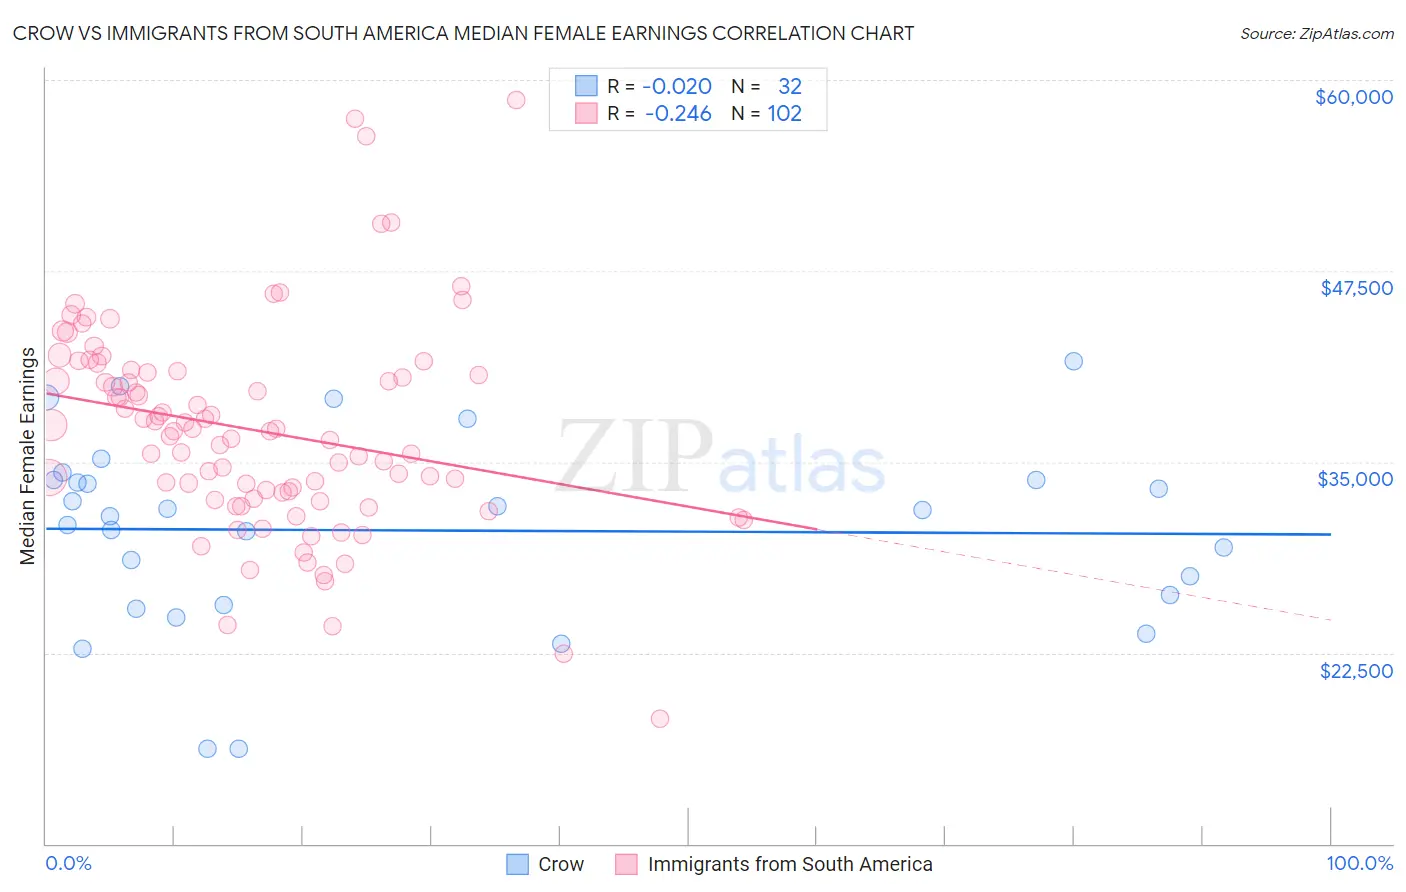 Crow vs Immigrants from South America Median Female Earnings